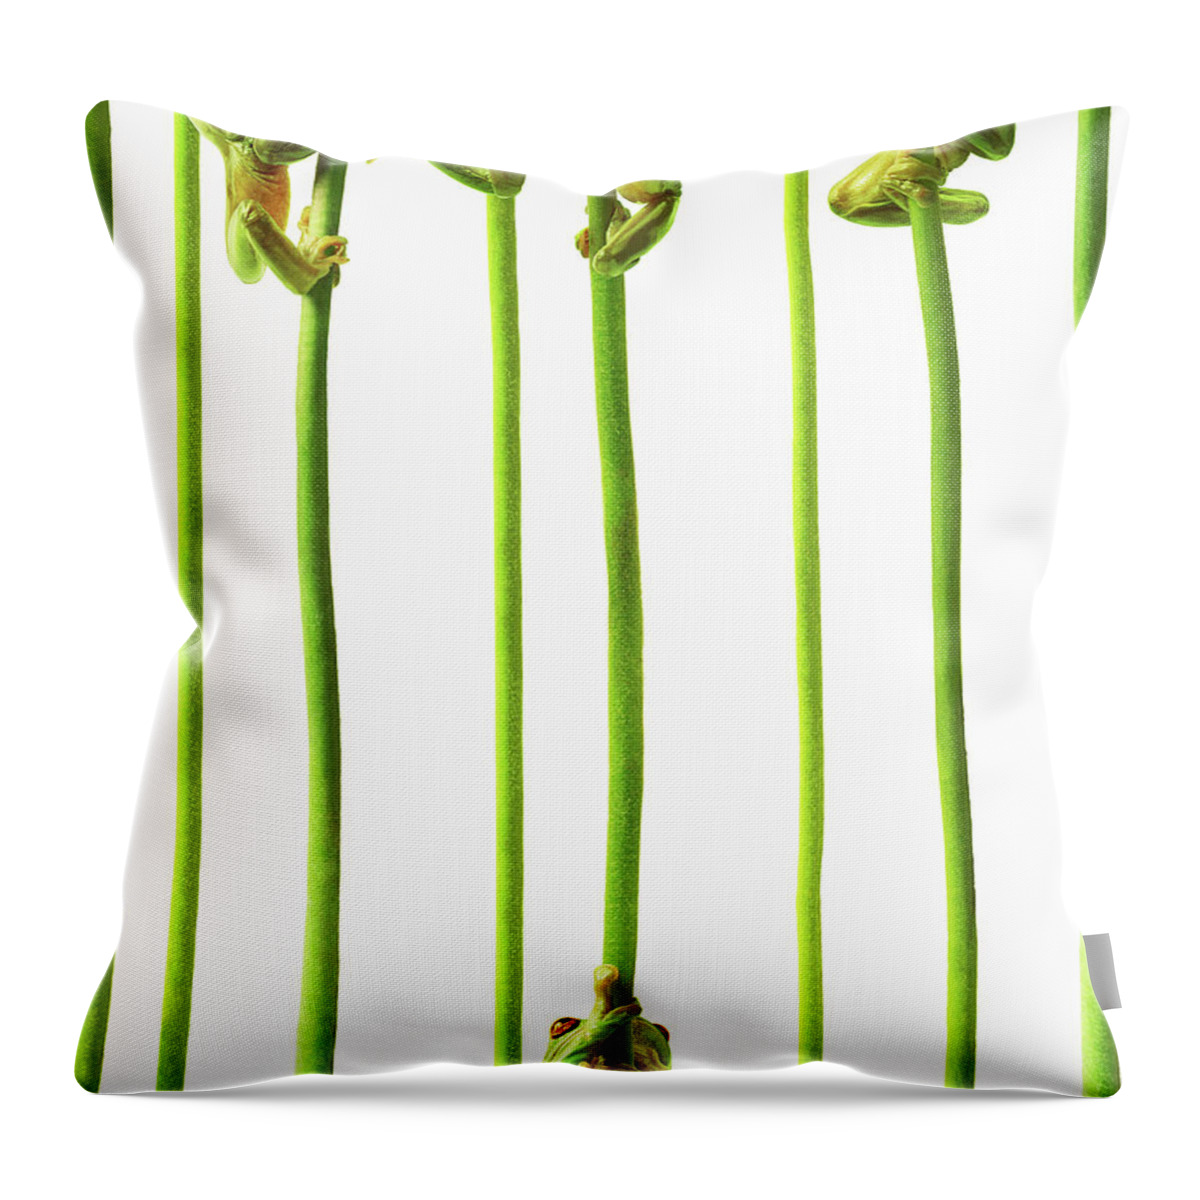 Whites Tree Frog Throw Pillow featuring the photograph Whites Tree Frogs Climbing Plant Stems by Gandee Vasan